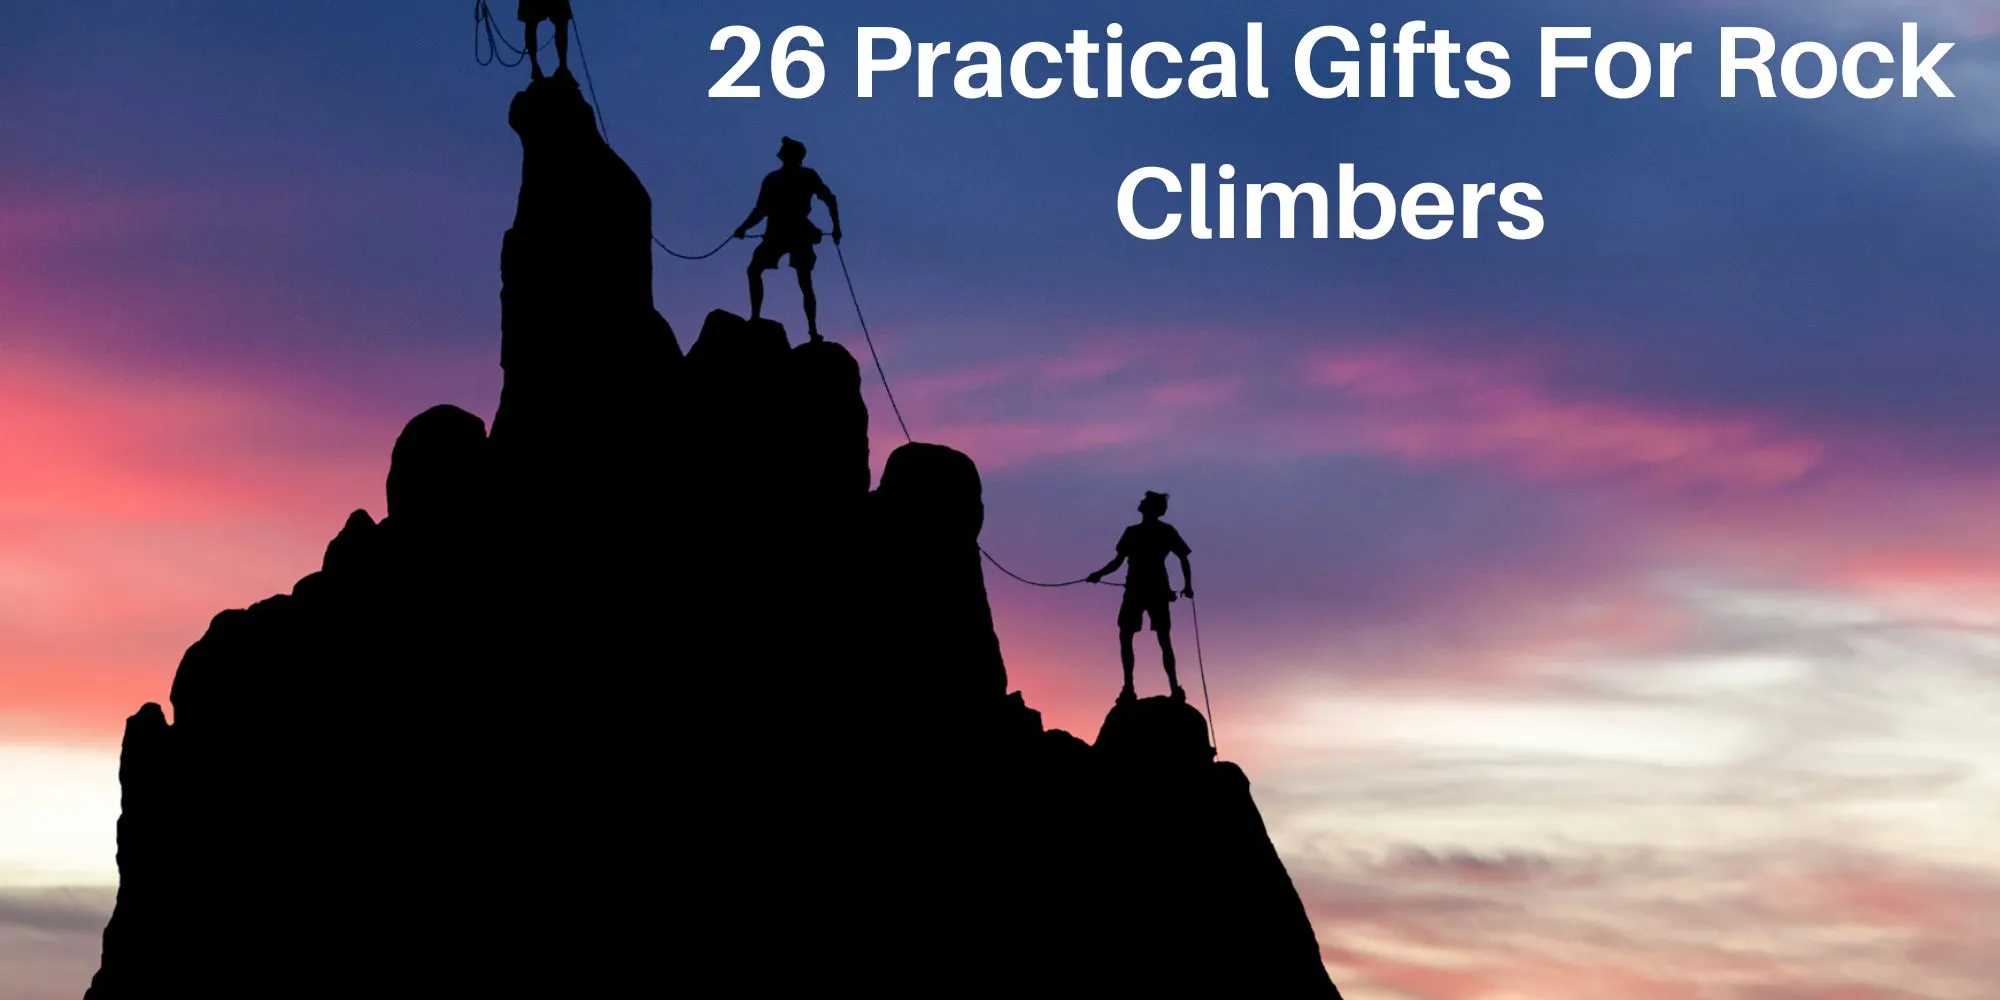 26-Practical-Gifts-For-Rock-Climbers-_1_